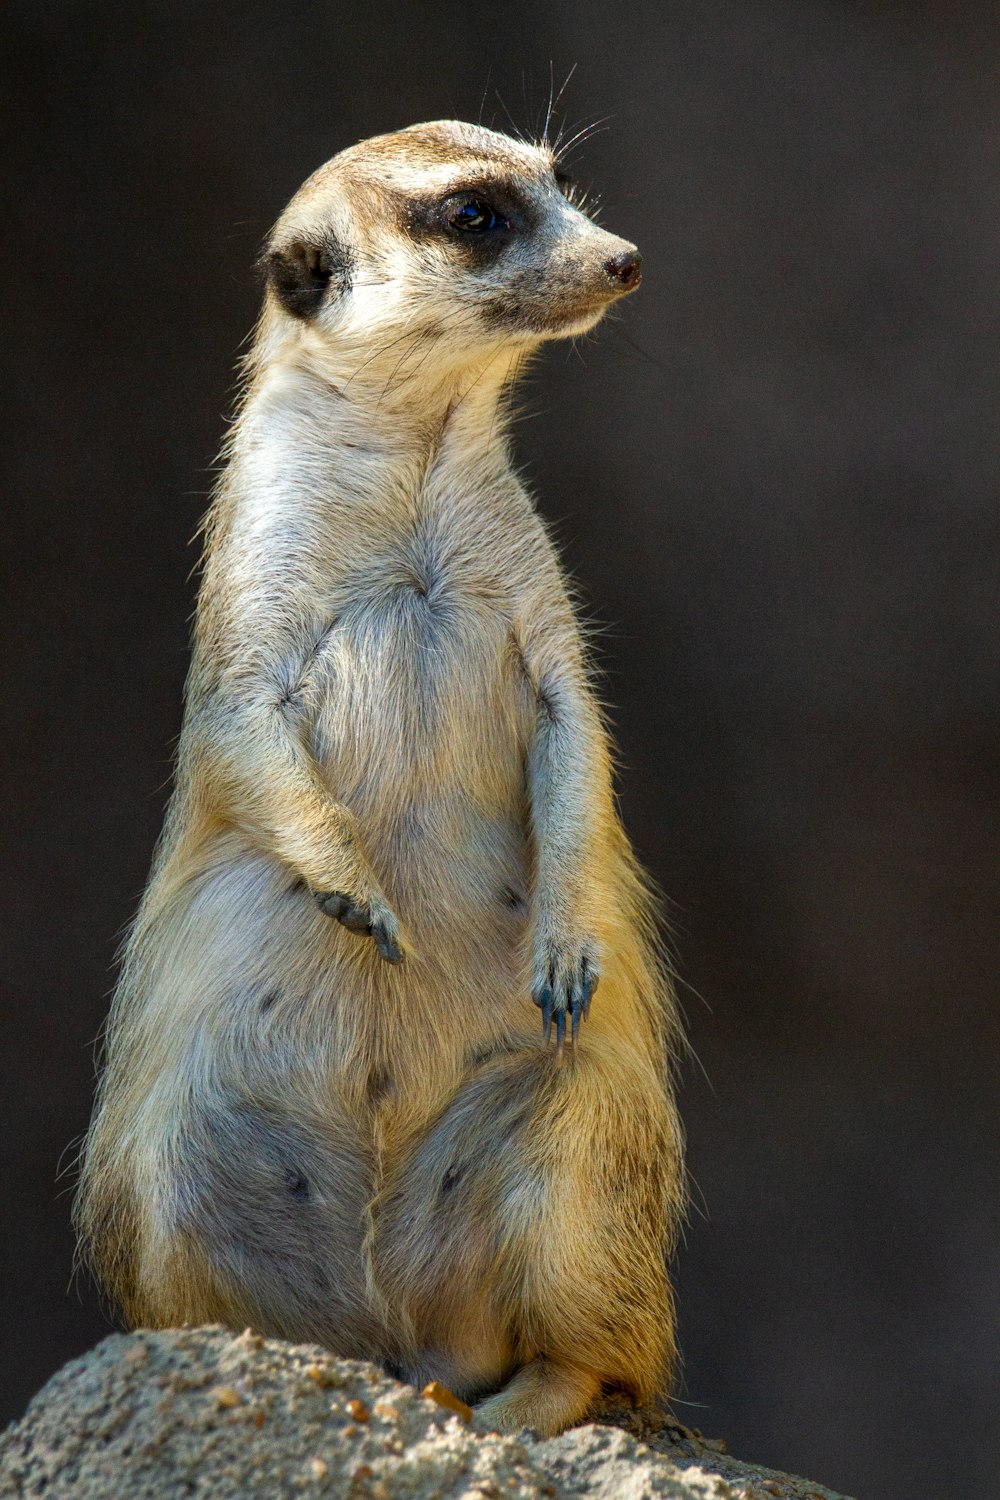 a small meerkat standing on a rock